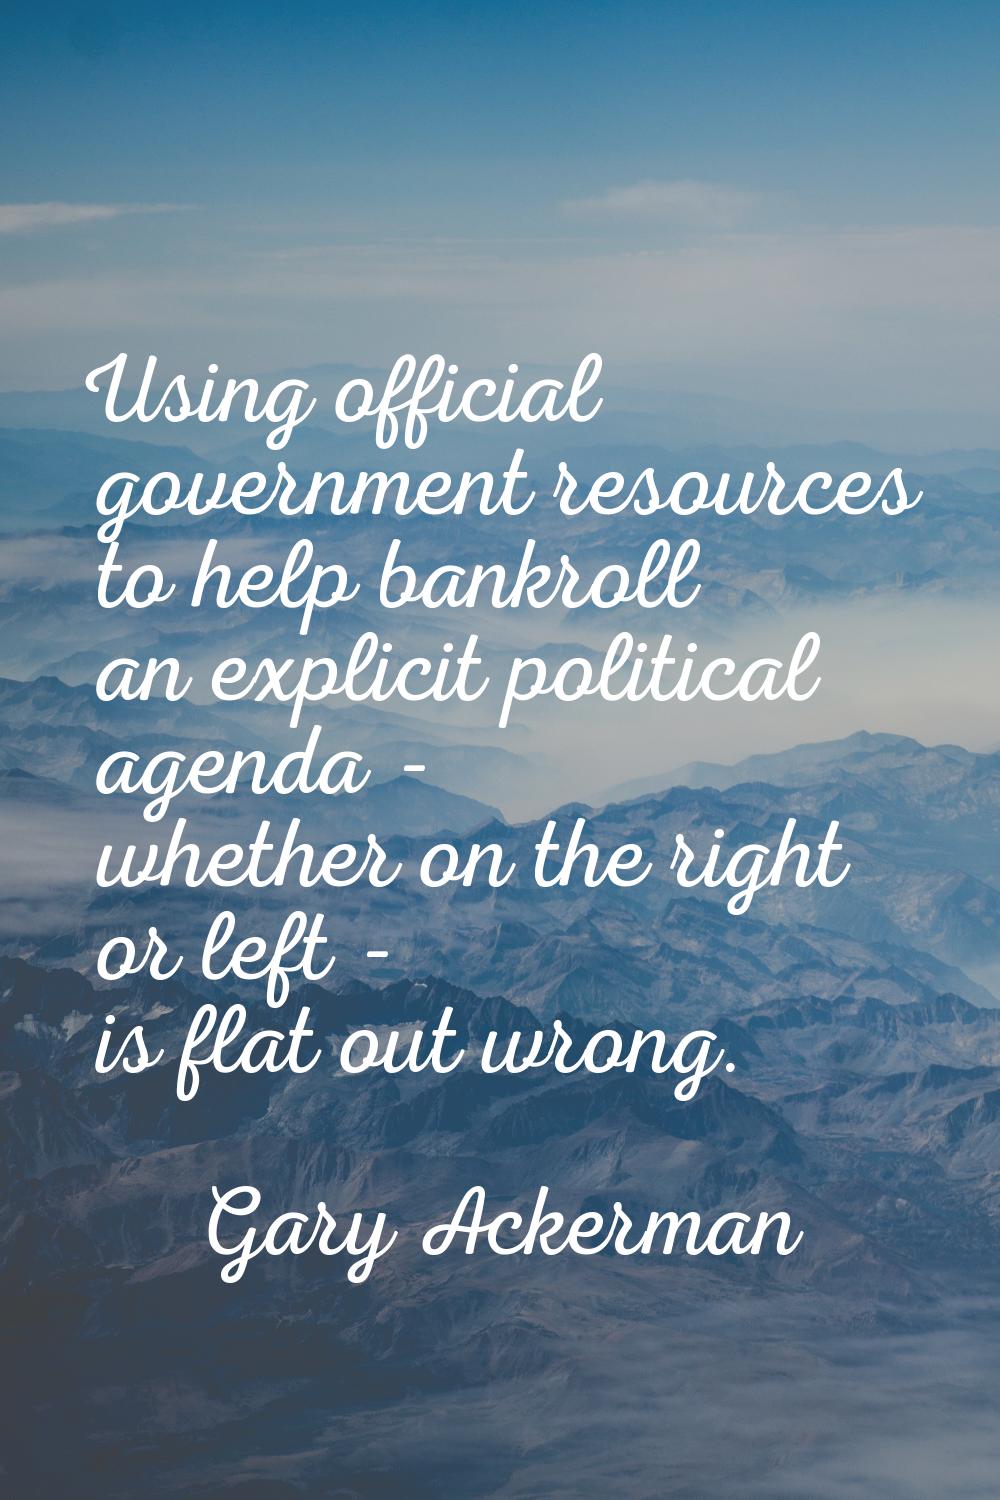 Using official government resources to help bankroll an explicit political agenda - whether on the 